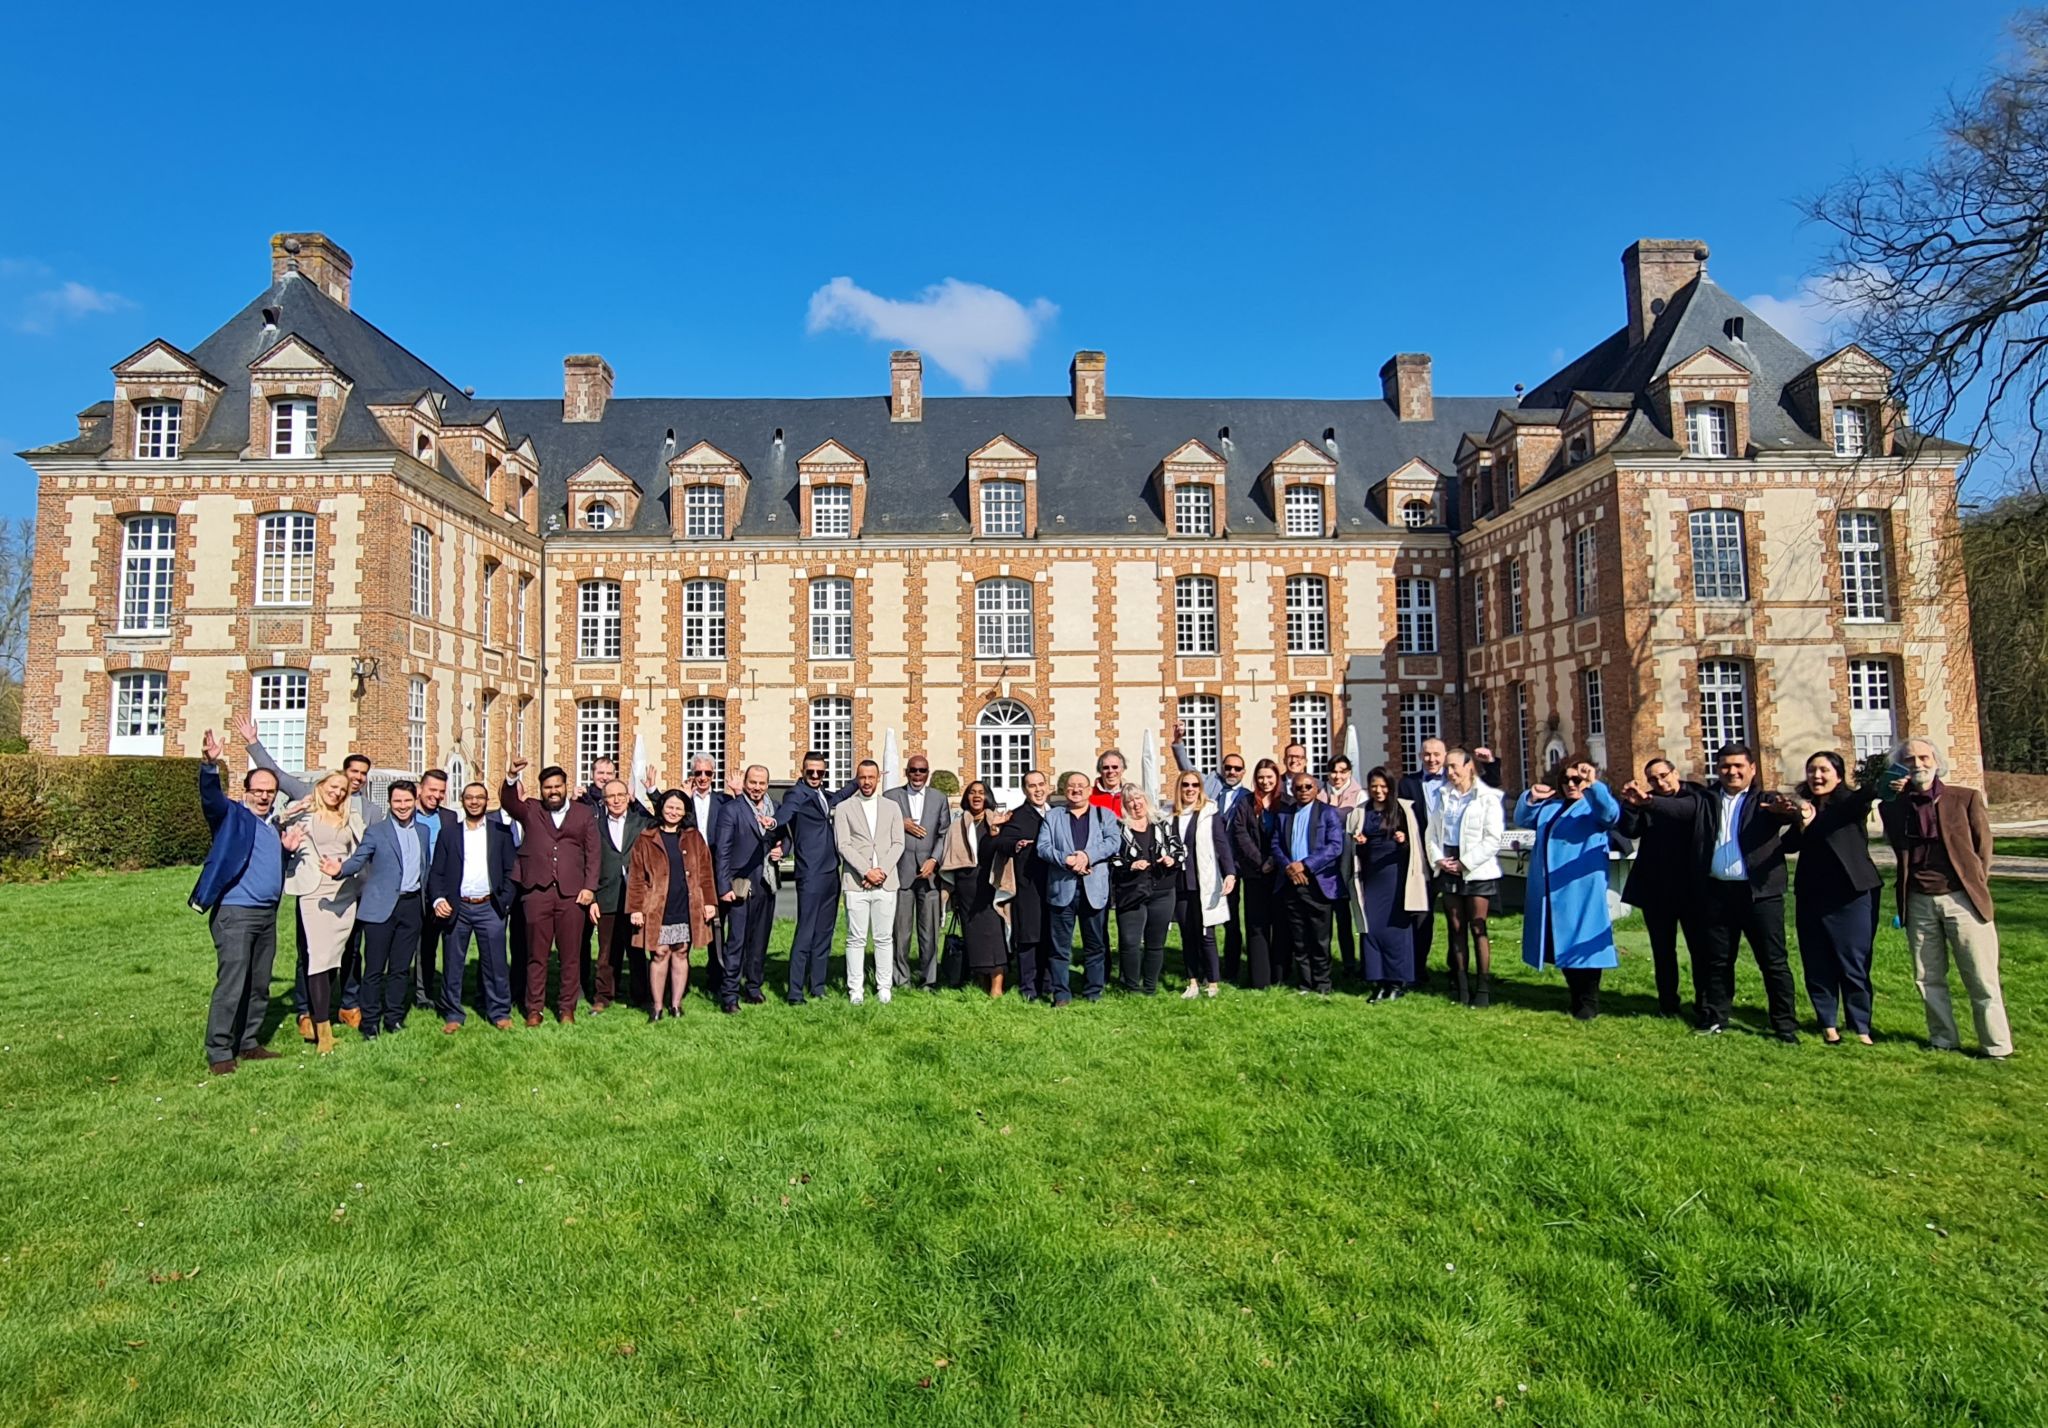 Bridging Continents for Growth: Celebrating Our Affiliates Convention in France